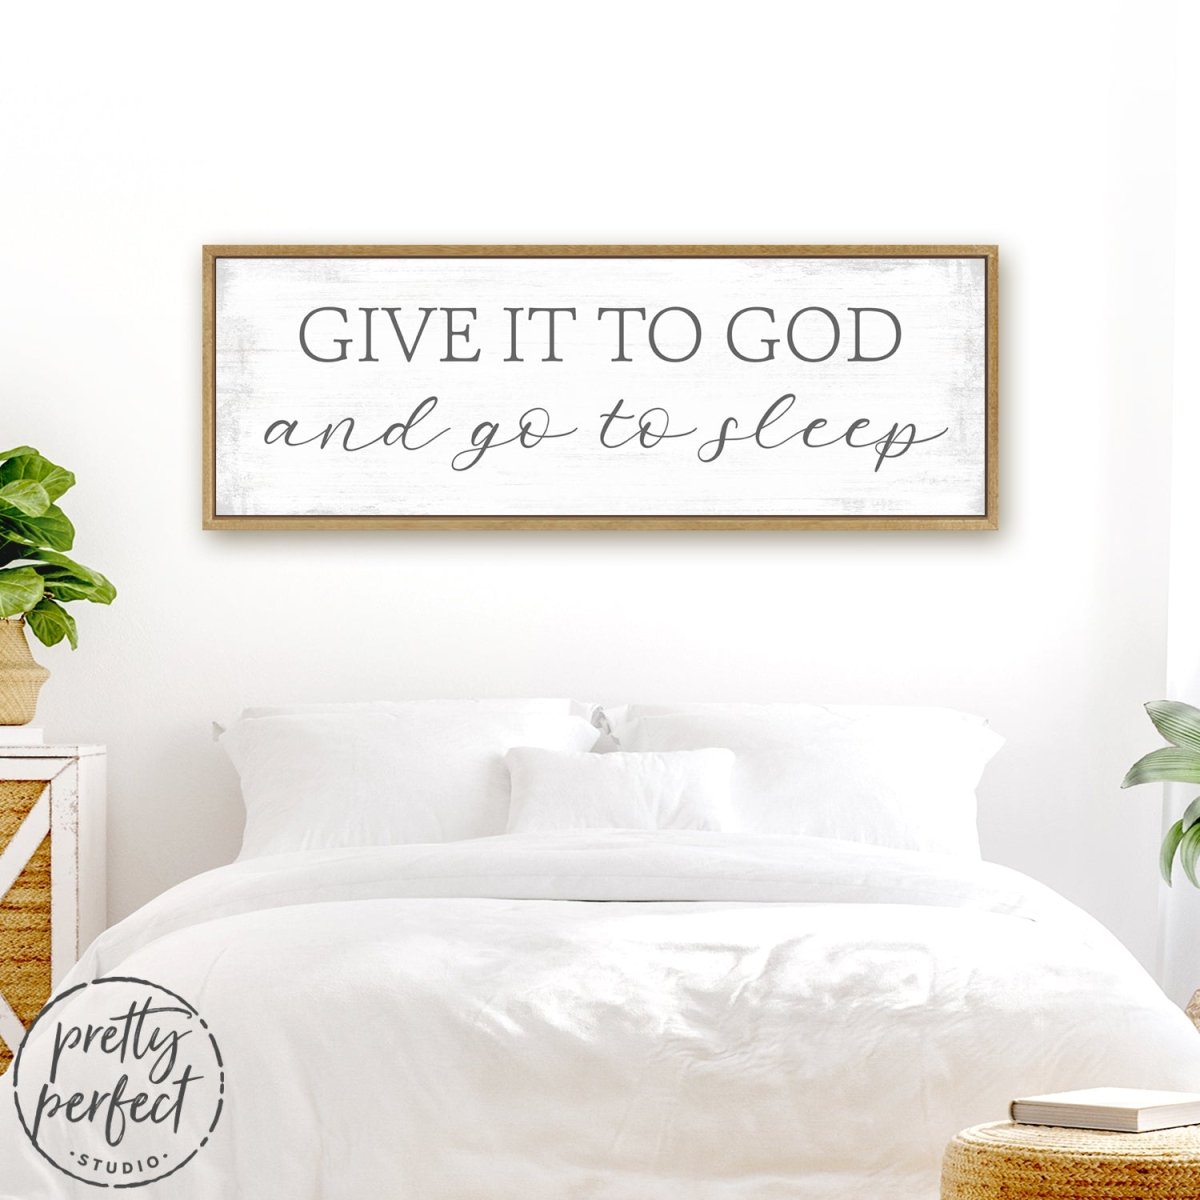 Give It To God and Go To Sleep Sign Over Bed - Pretty Perfect Studio